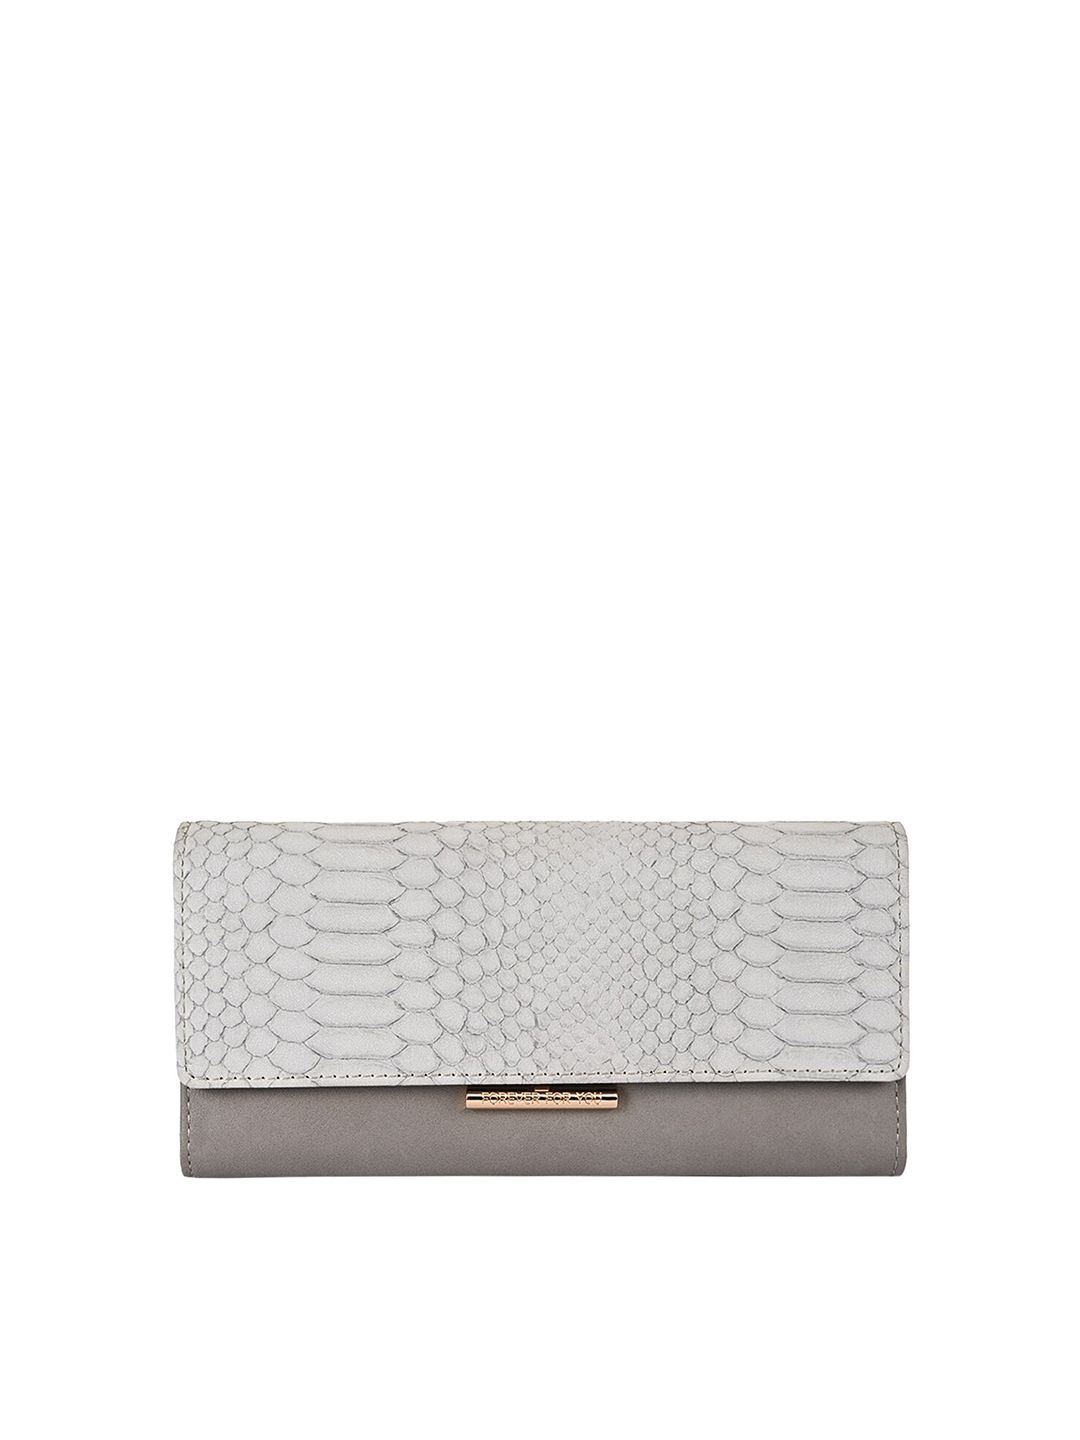 Apsis Women Grey & Gold-Toned Textured Three Fold Wallet Price in India